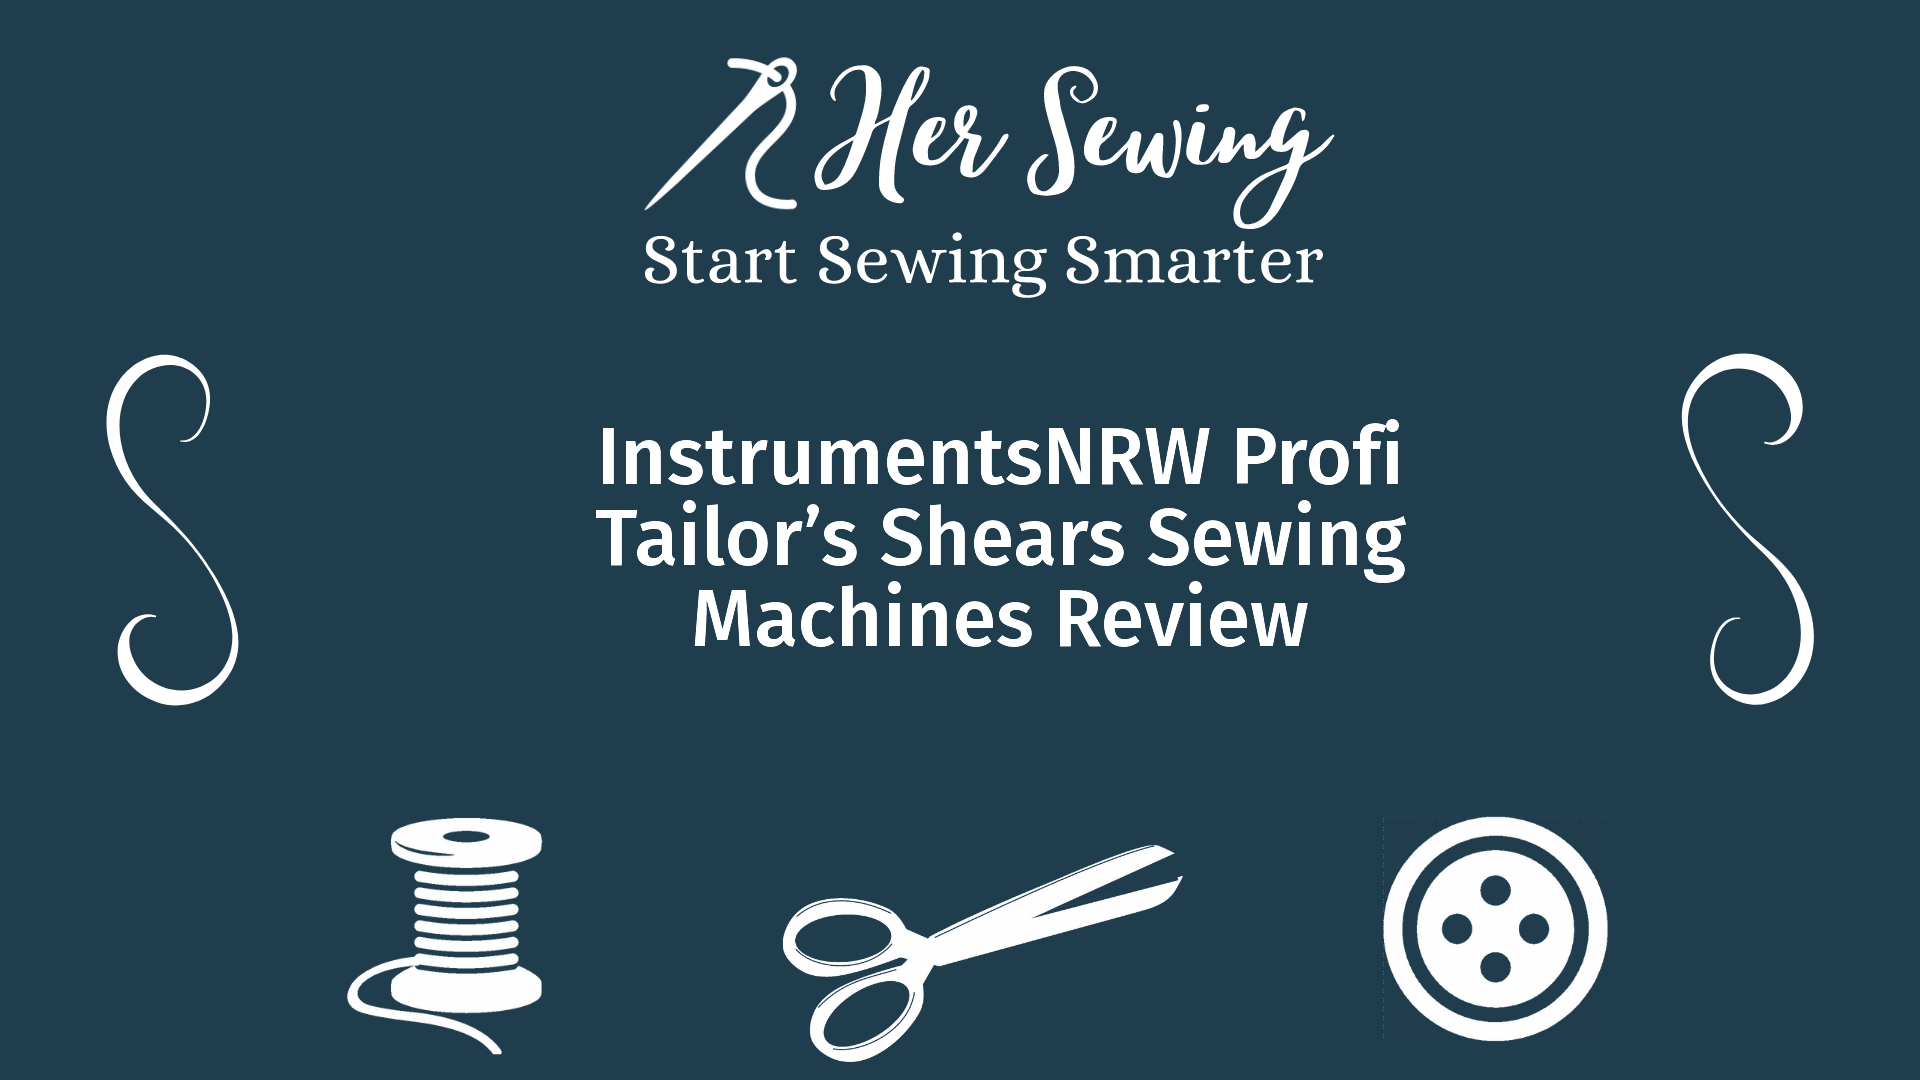 InstrumentsNRW Profi Tailor’s Shears Sewing Machines Review